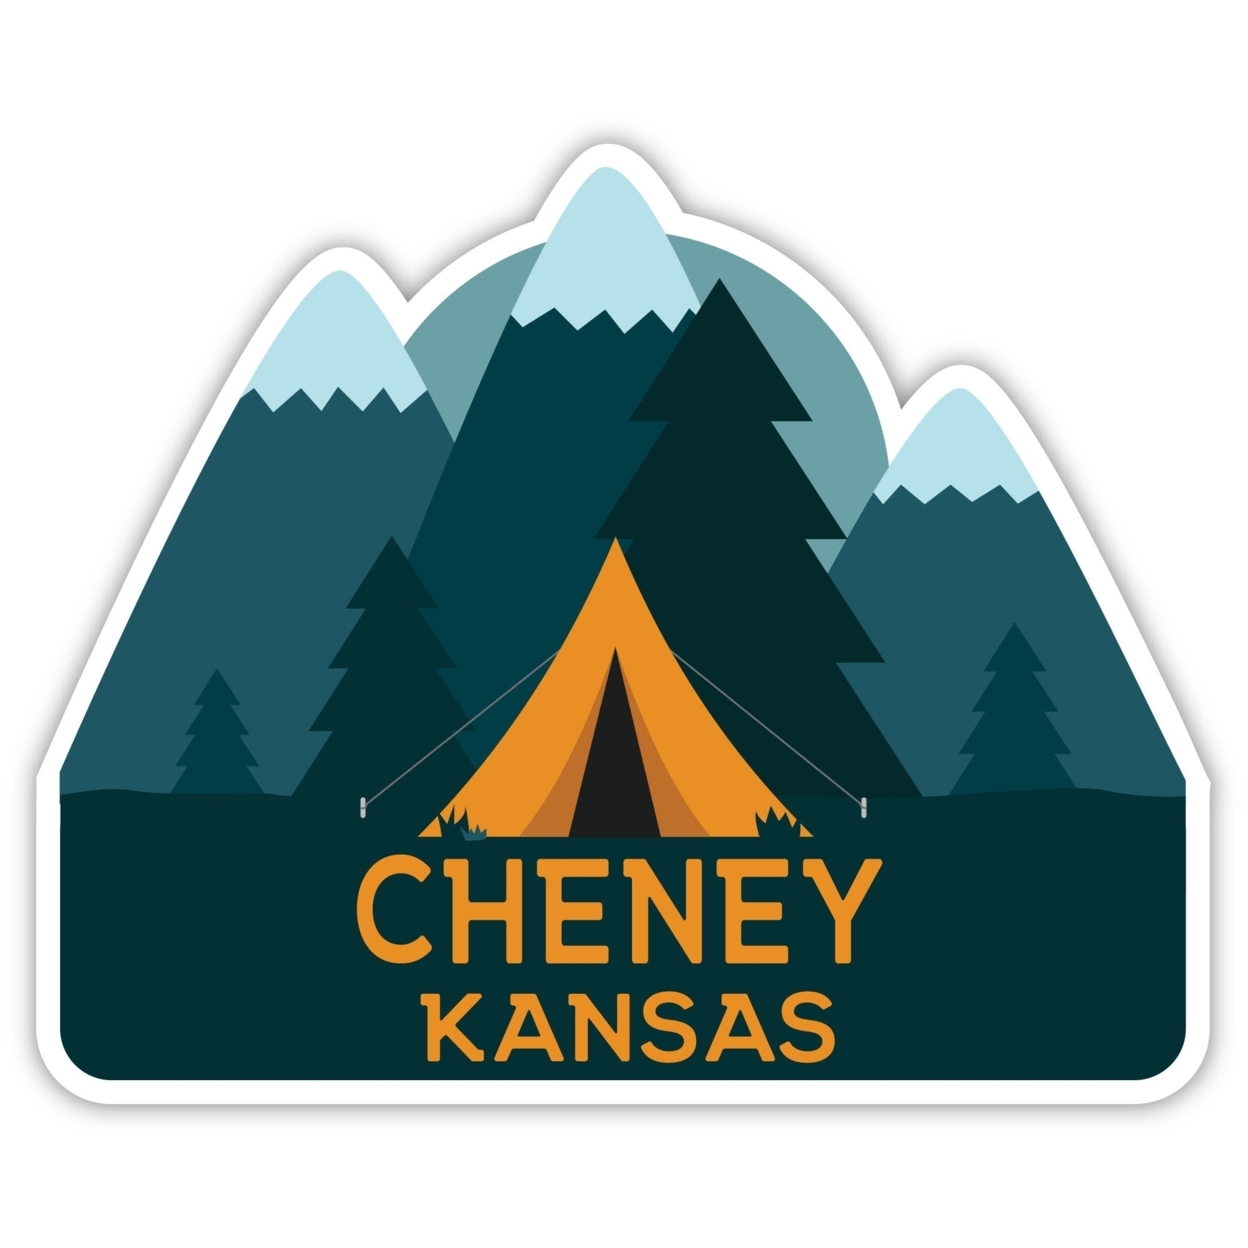 Cheney Kansas Souvenir Decorative Stickers (Choose Theme And Size) - 4-Pack, 8-Inch, Tent